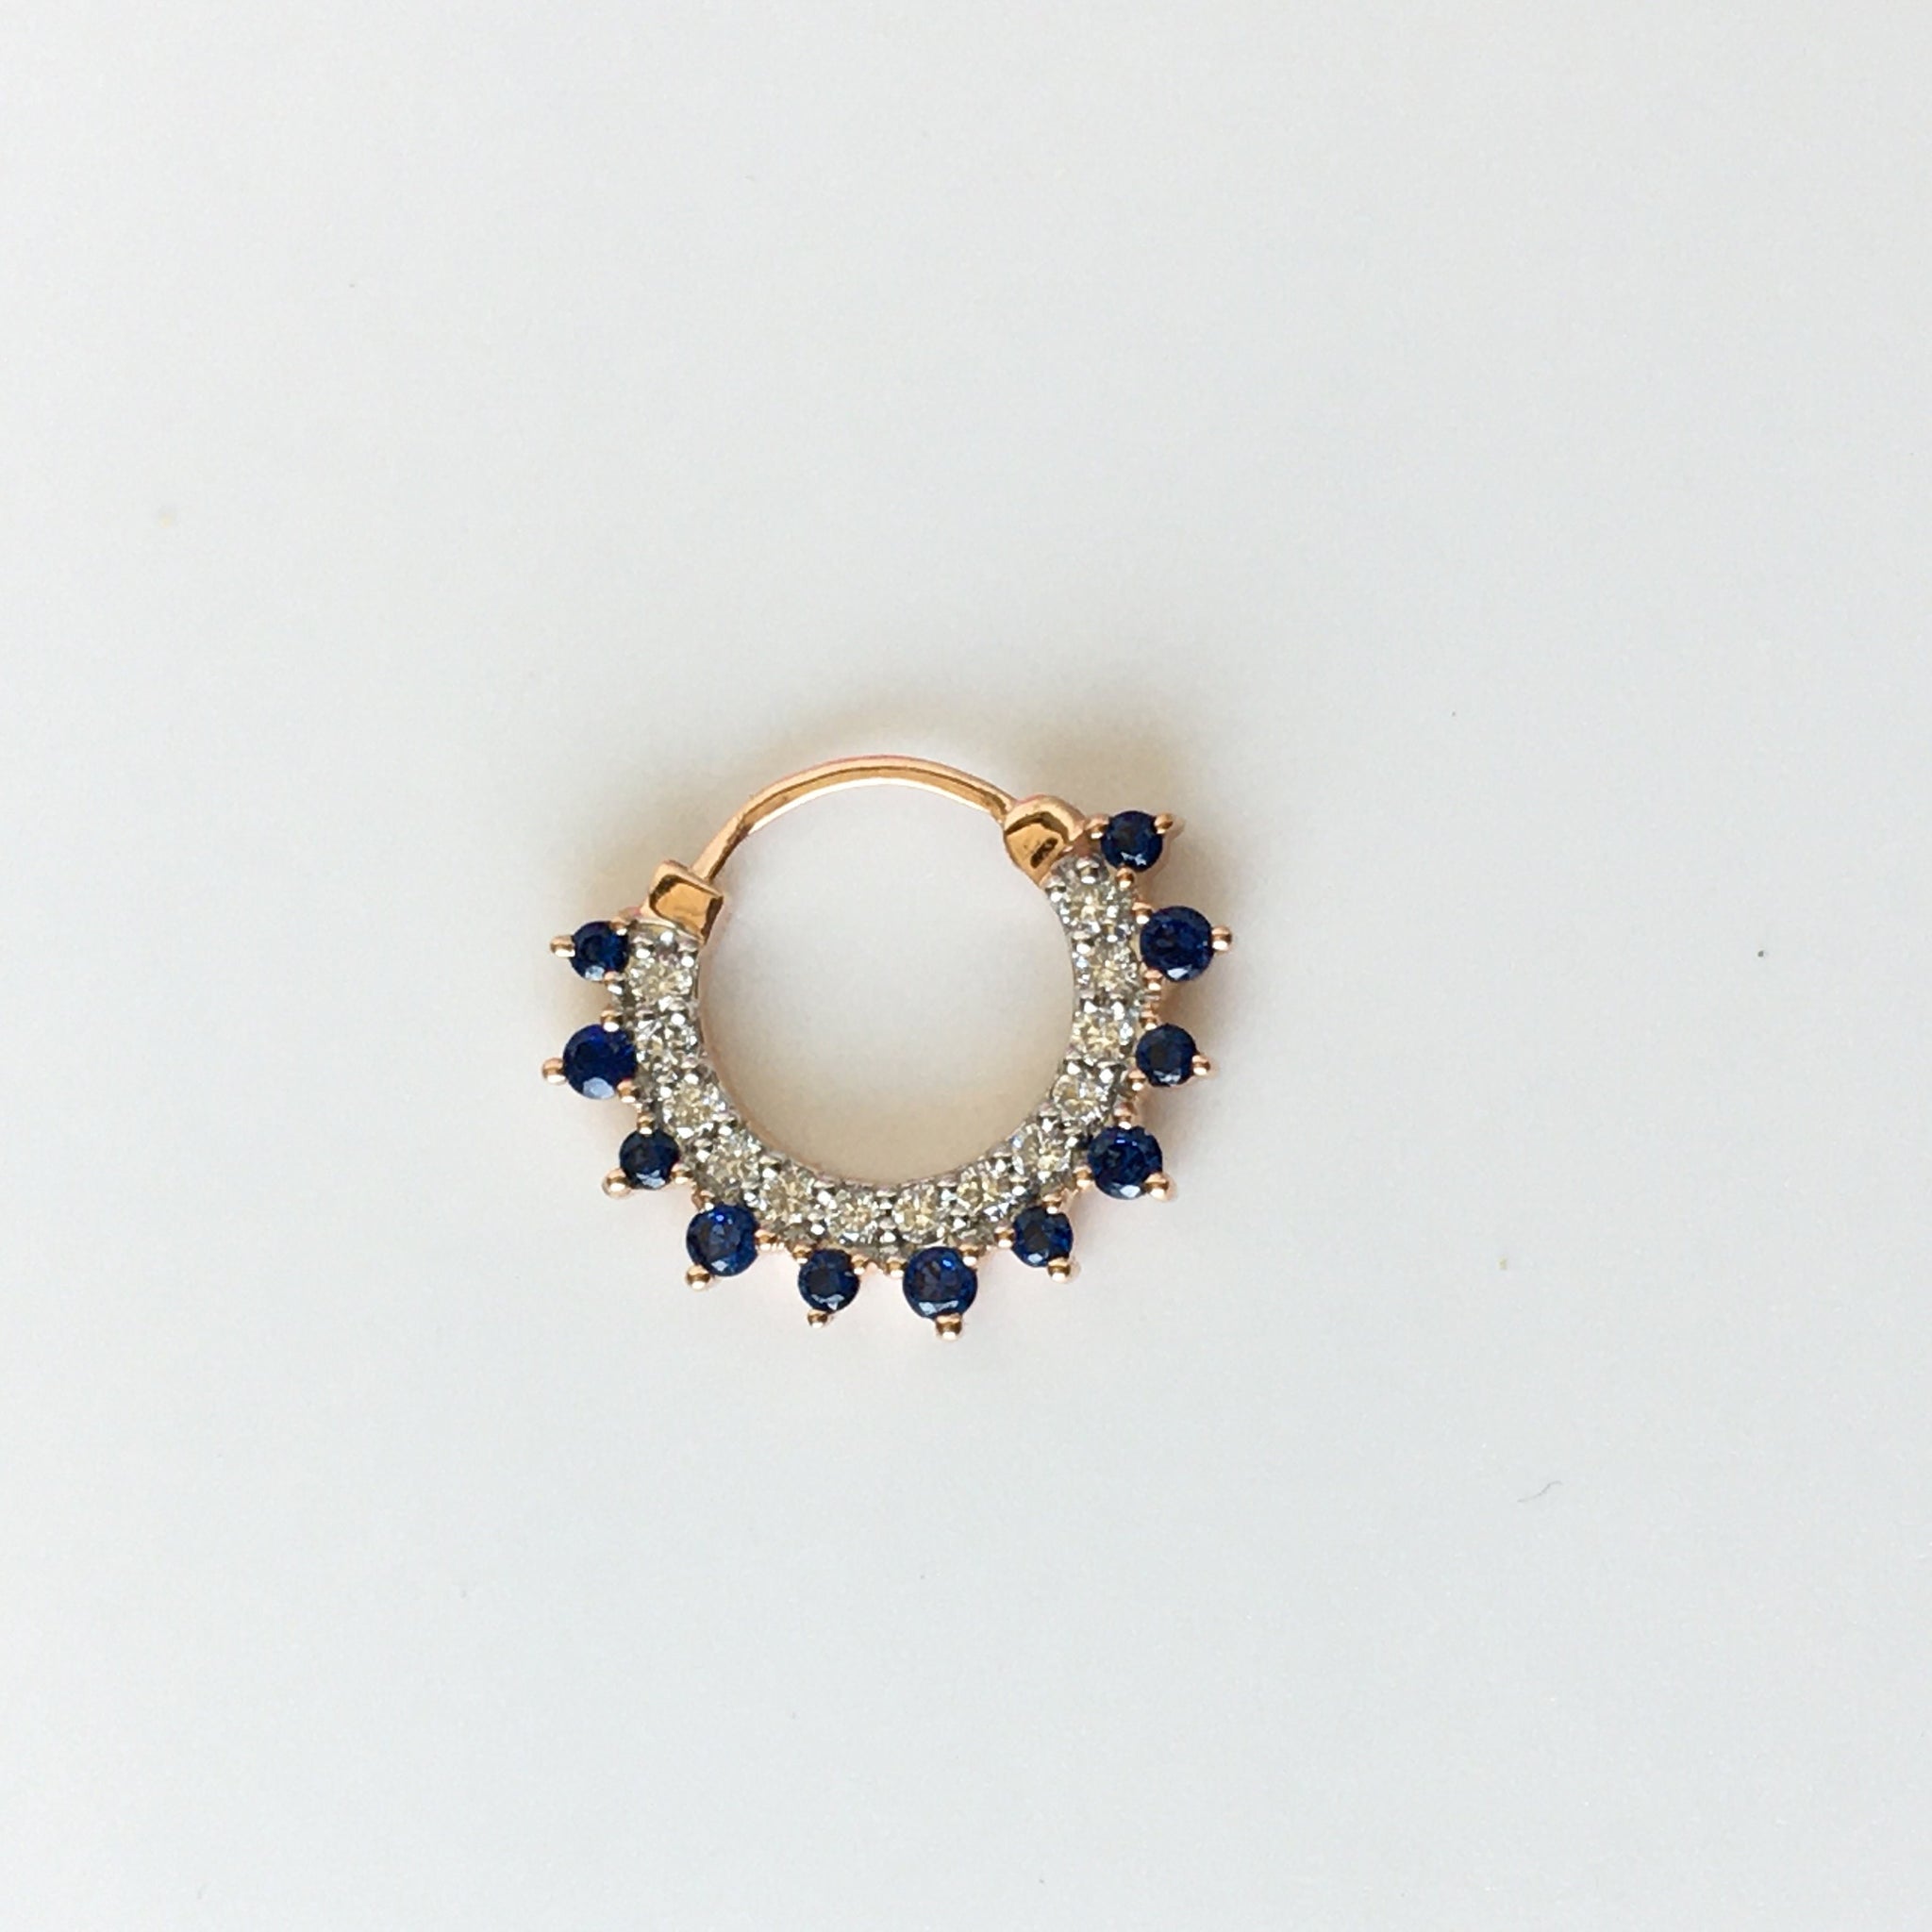 Septum Nose Ring in 14K Gold with Sapphire Stone